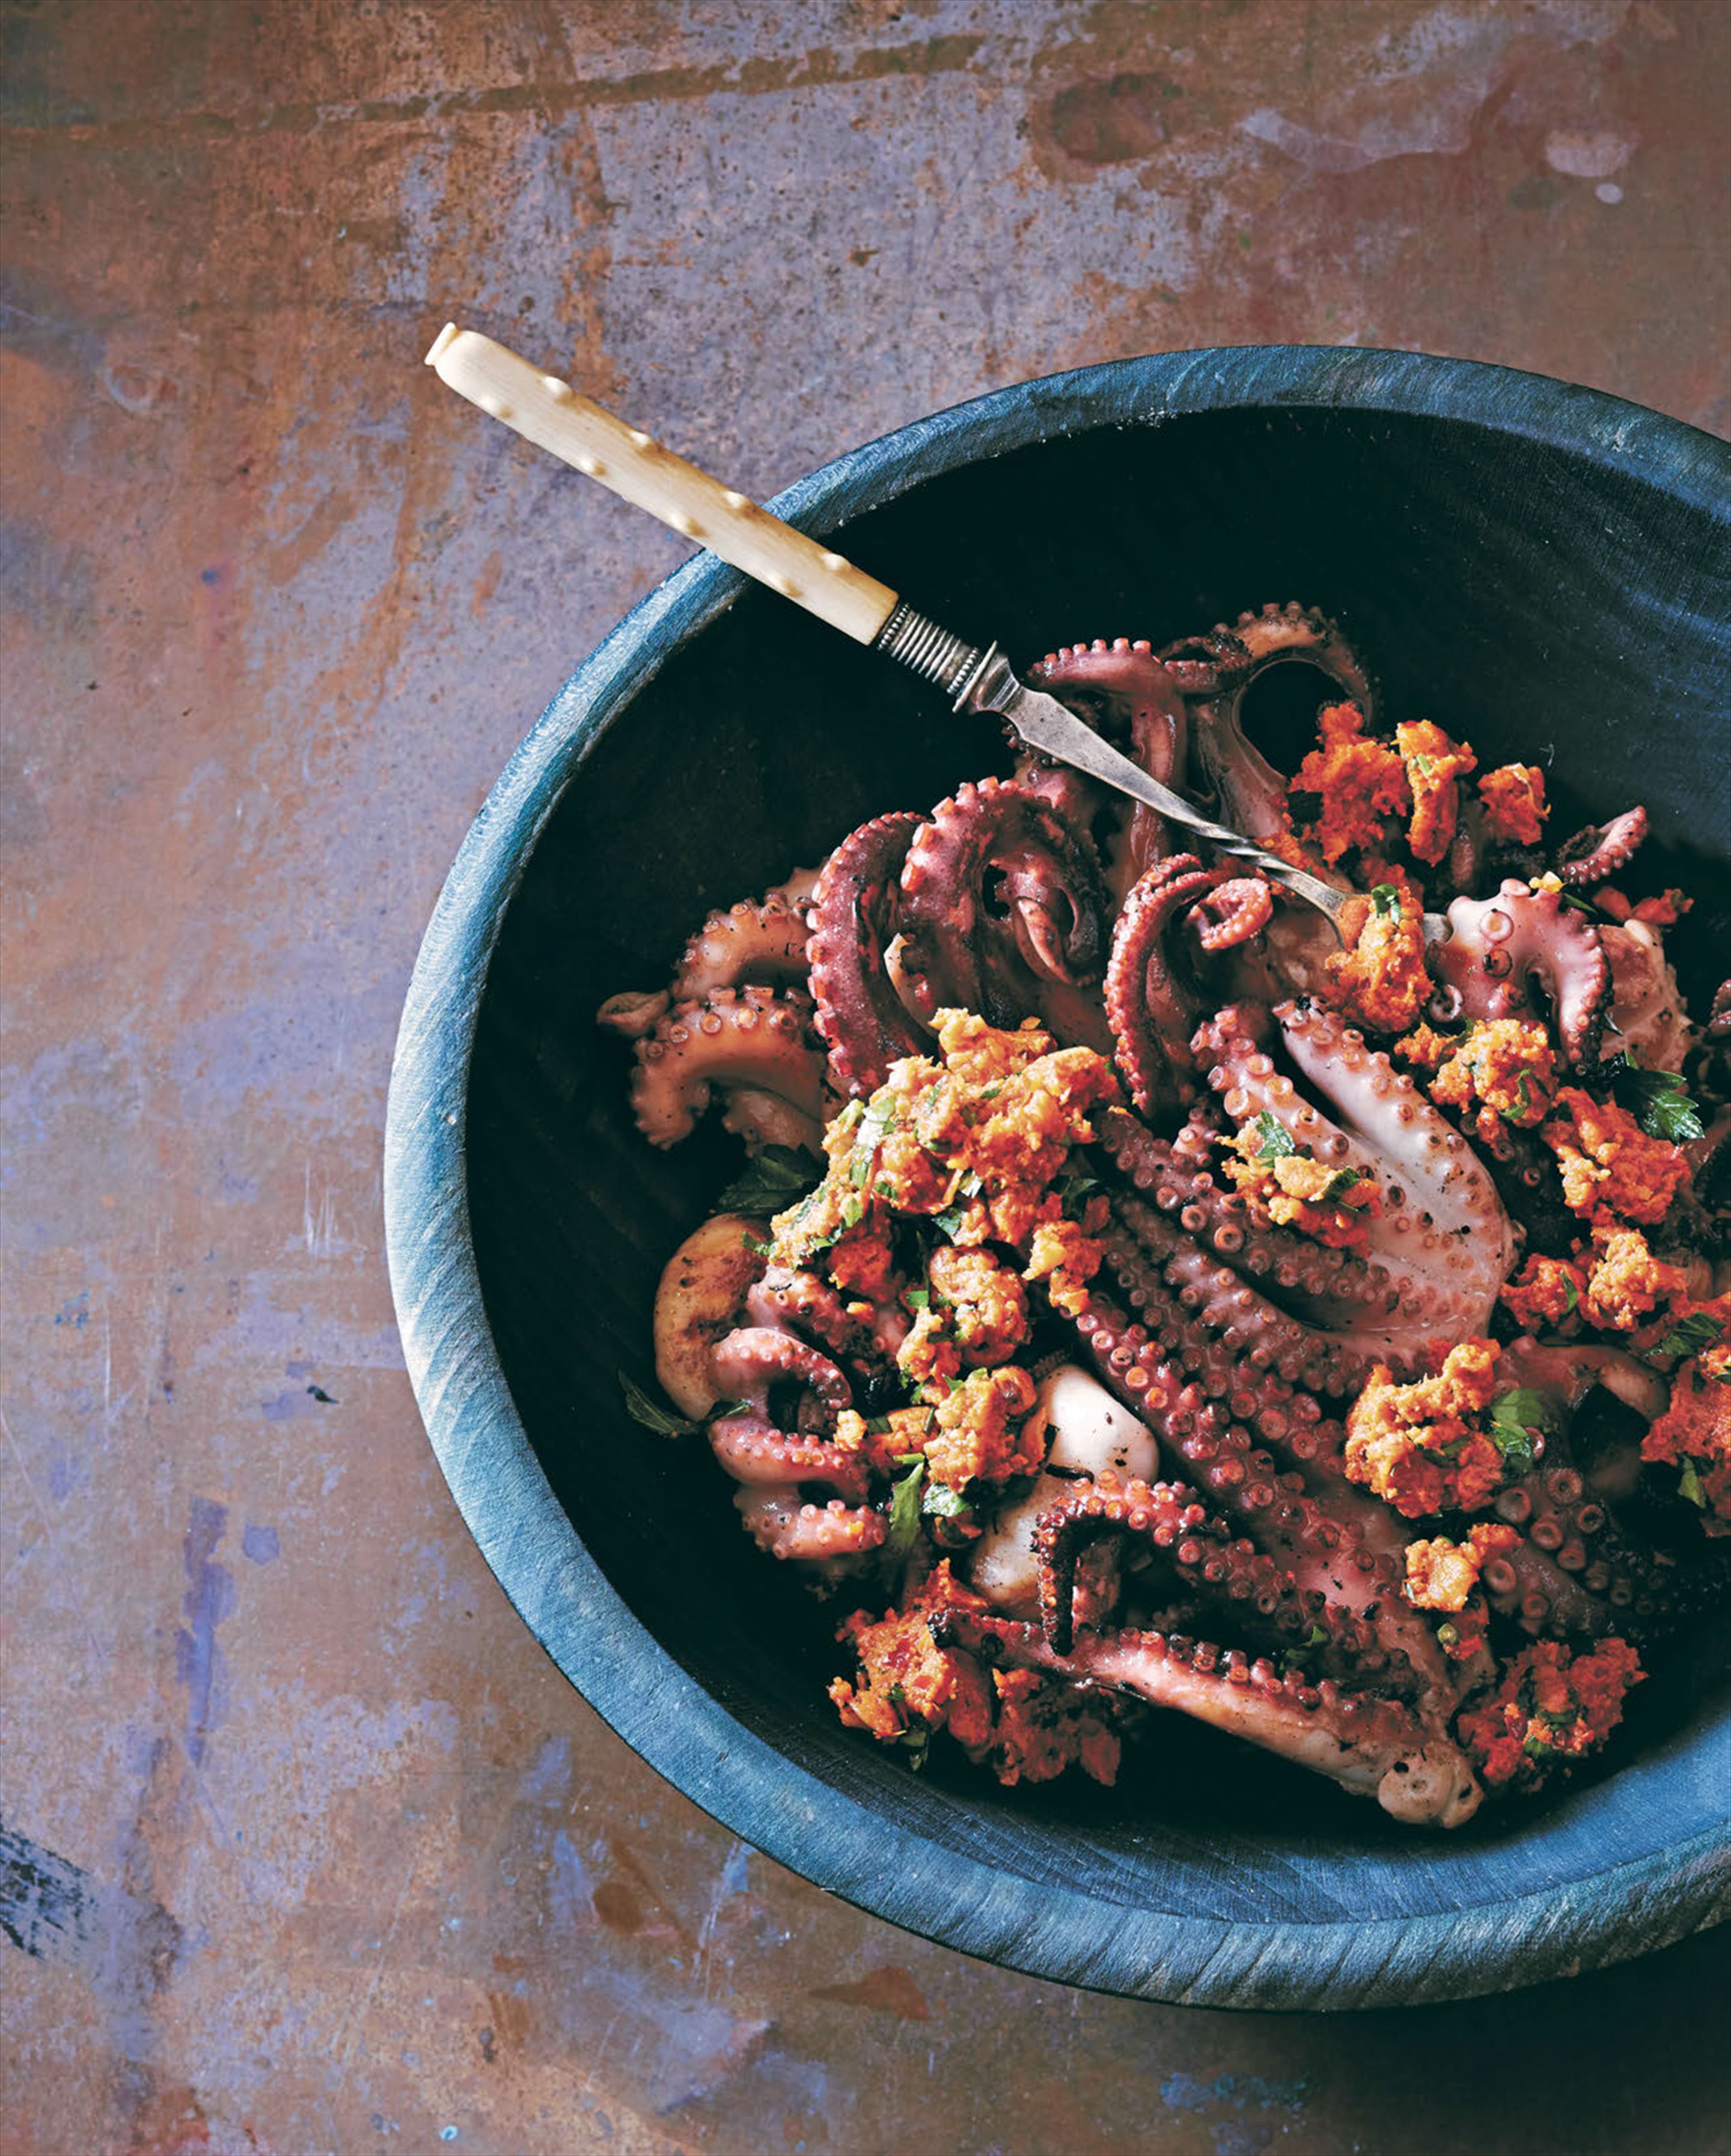 Barbecued octopus with tahini sauce